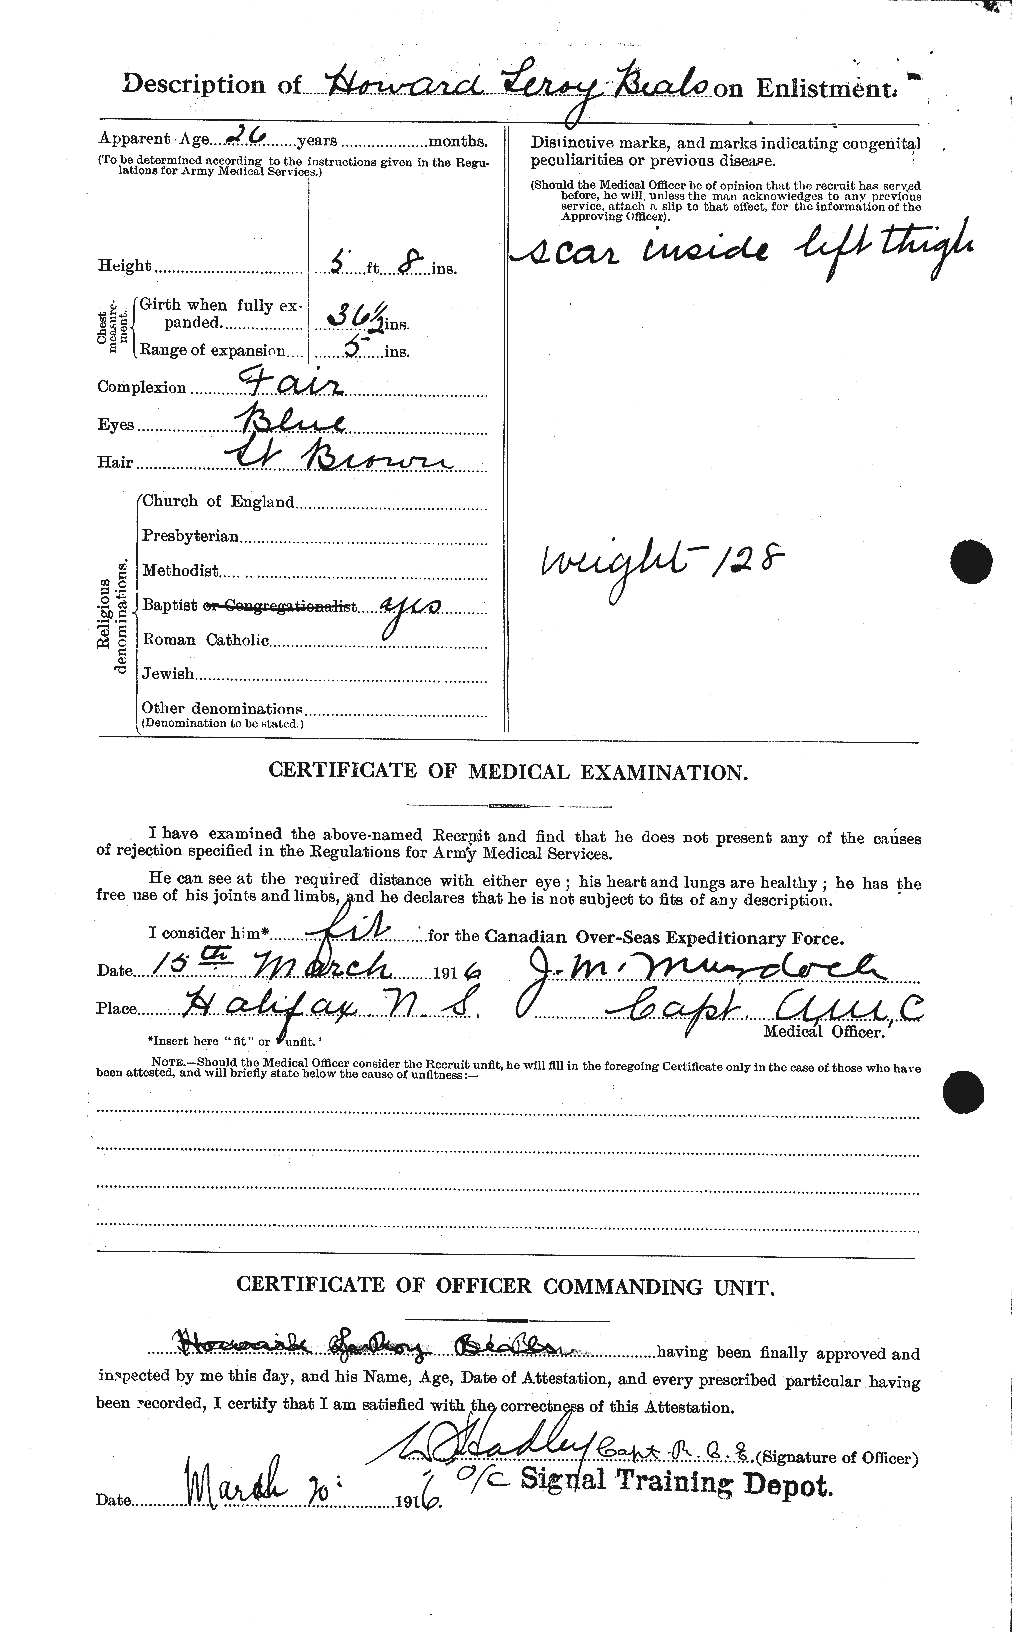 Personnel Records of the First World War - CEF 235392b